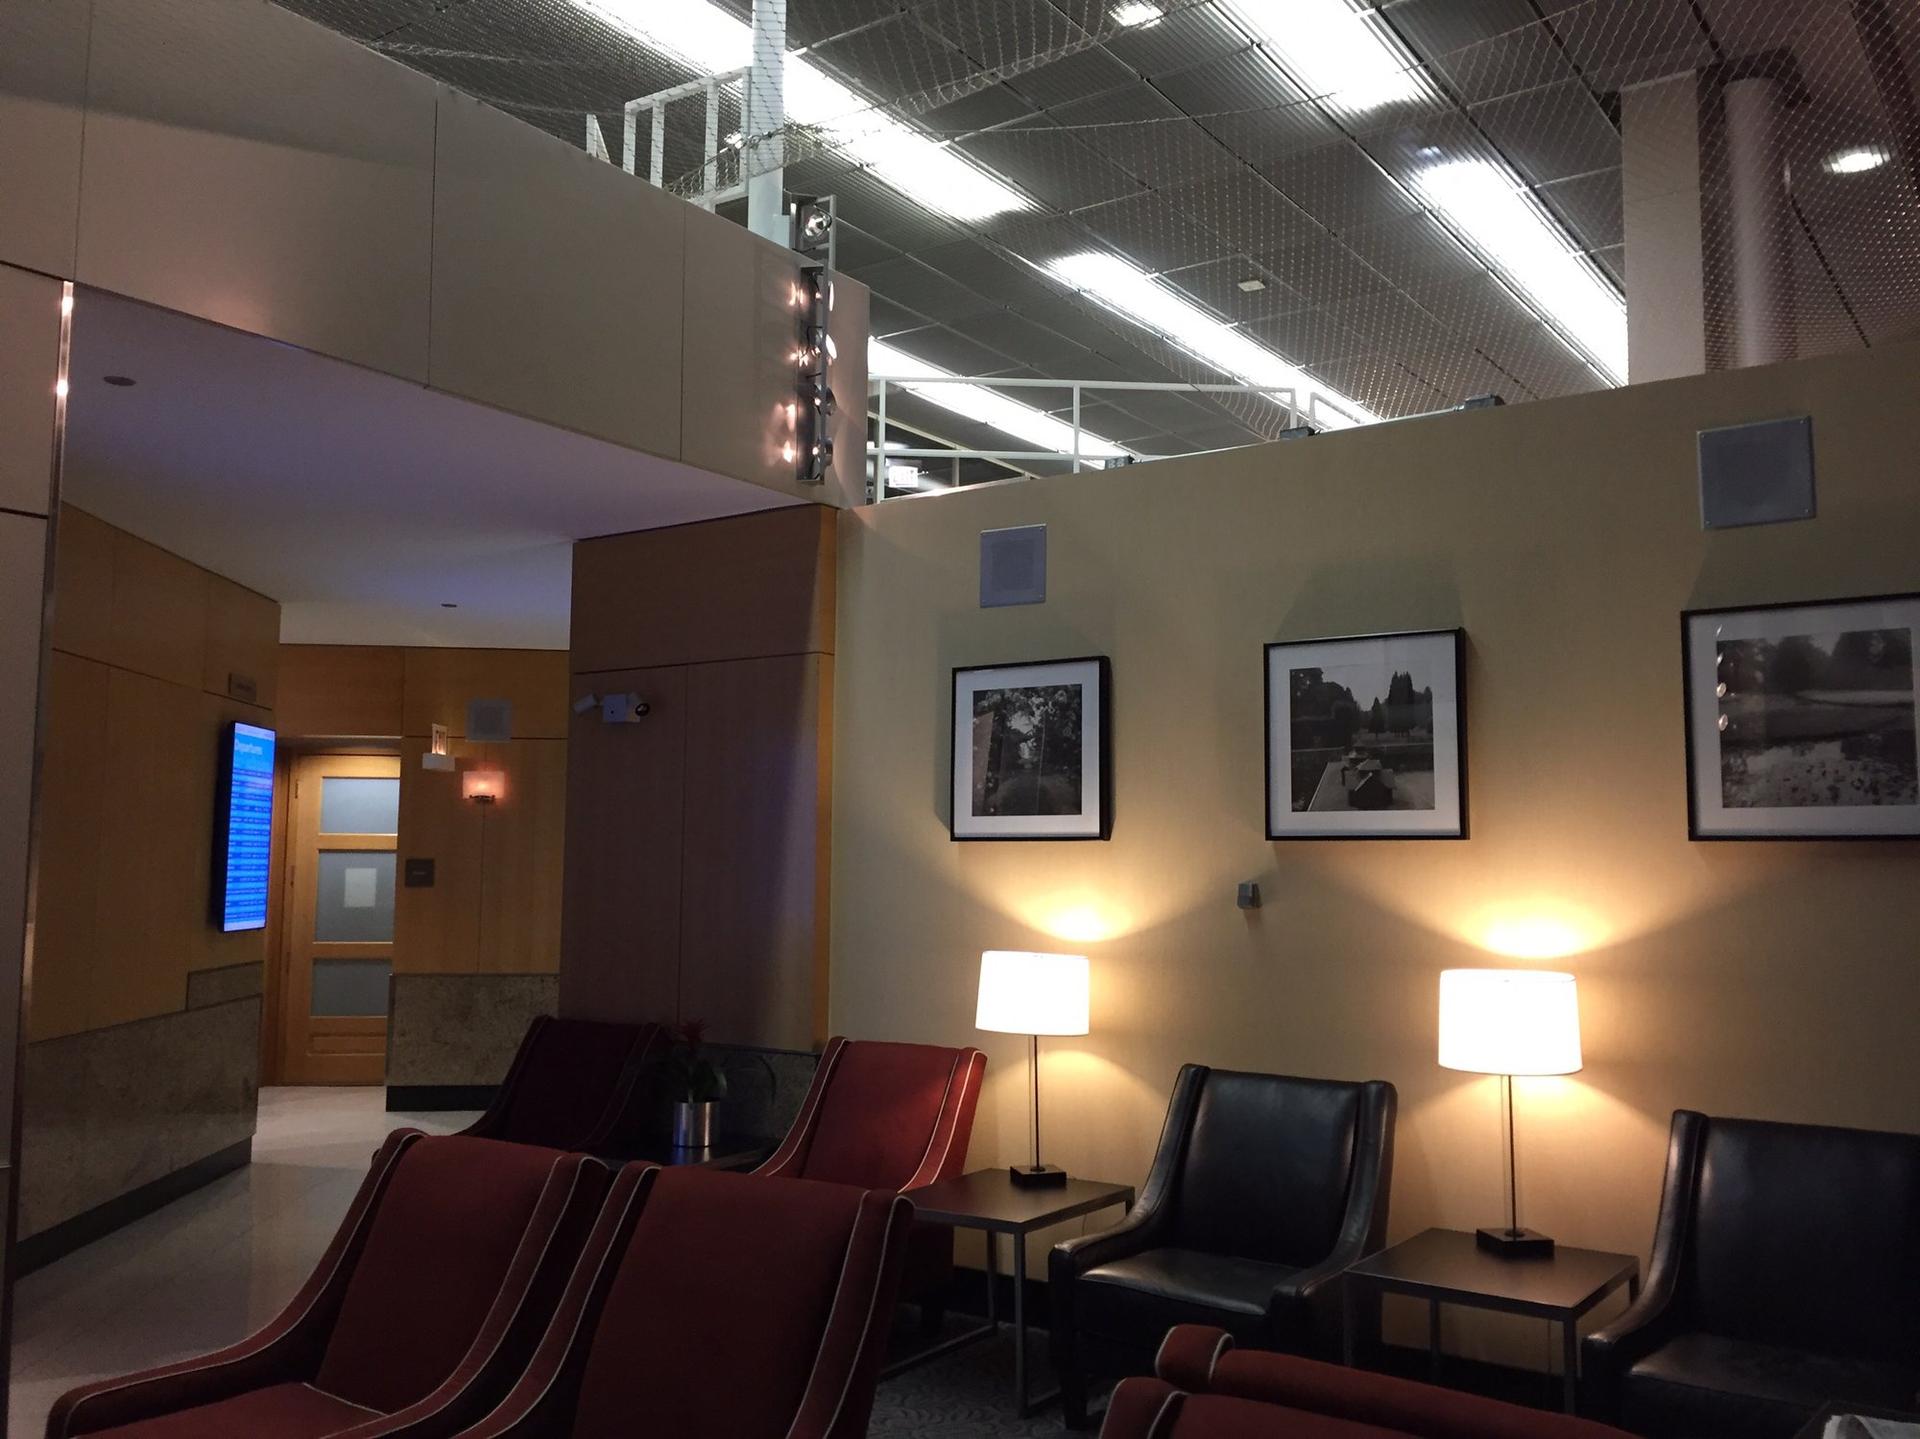 American Airlines Admirals Club image 1 of 6